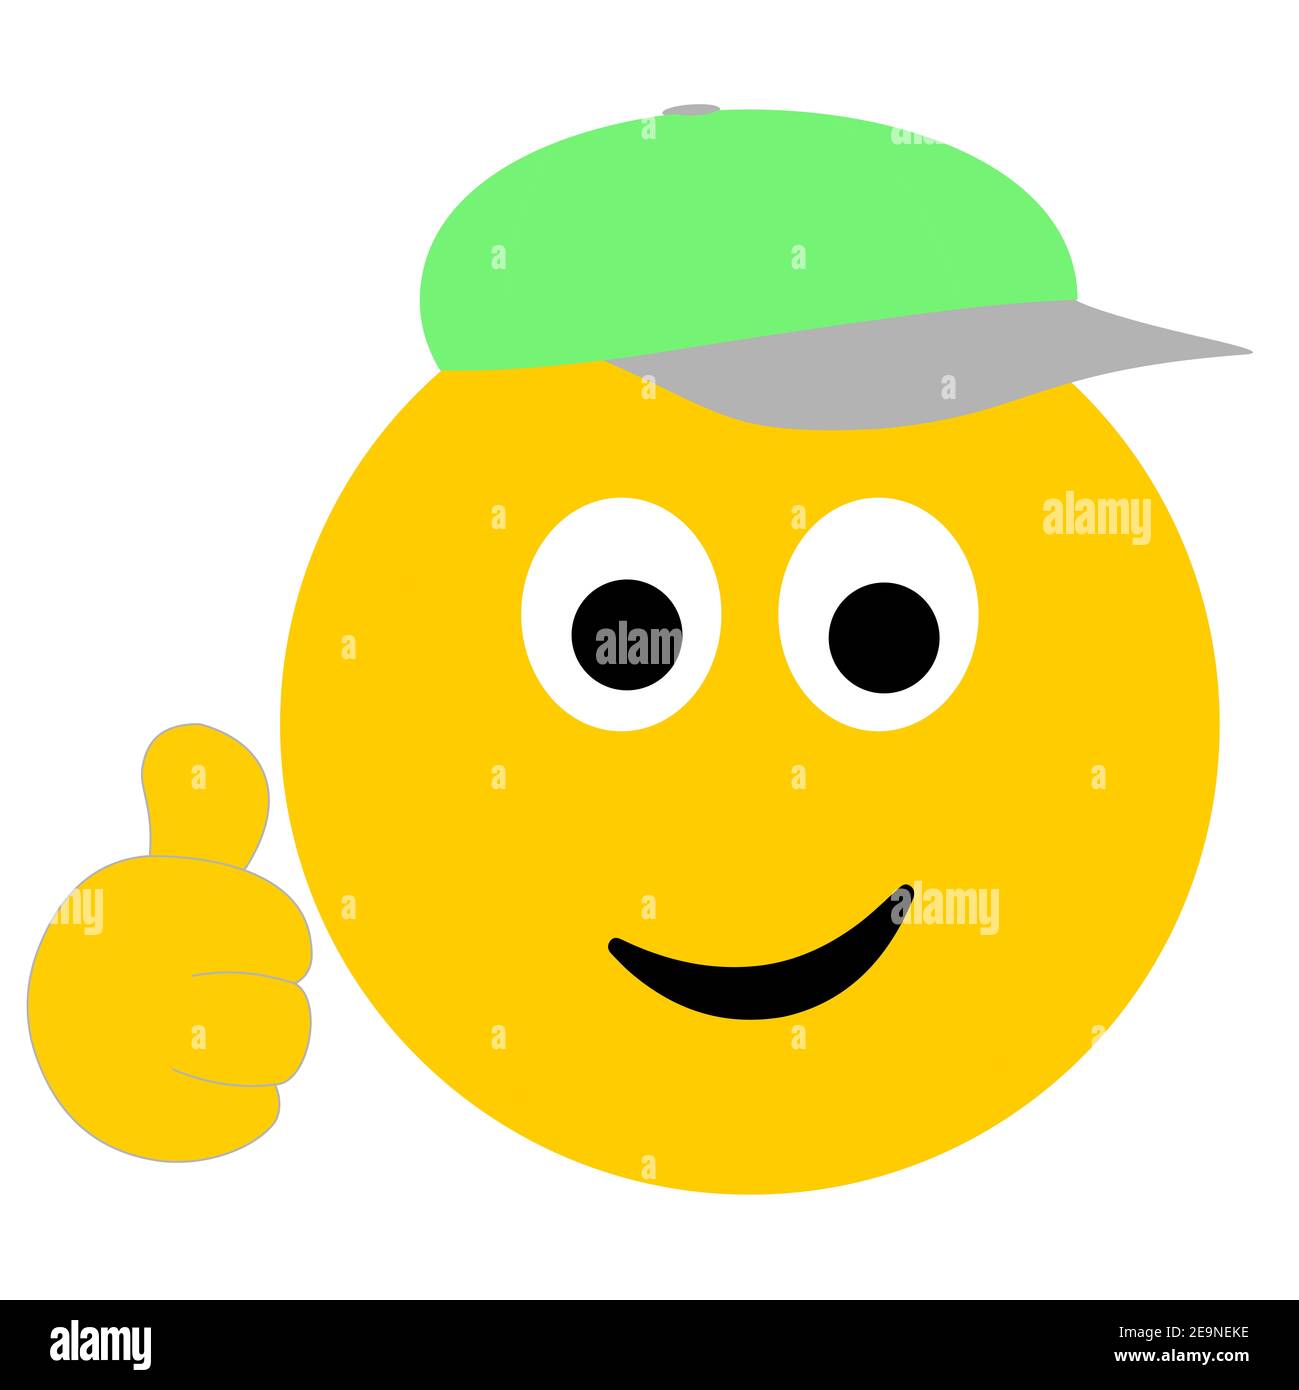 Thumbs Up Happy Emoji In Baseball Cap Social Media Expression And Meme Stock Photo Alamy